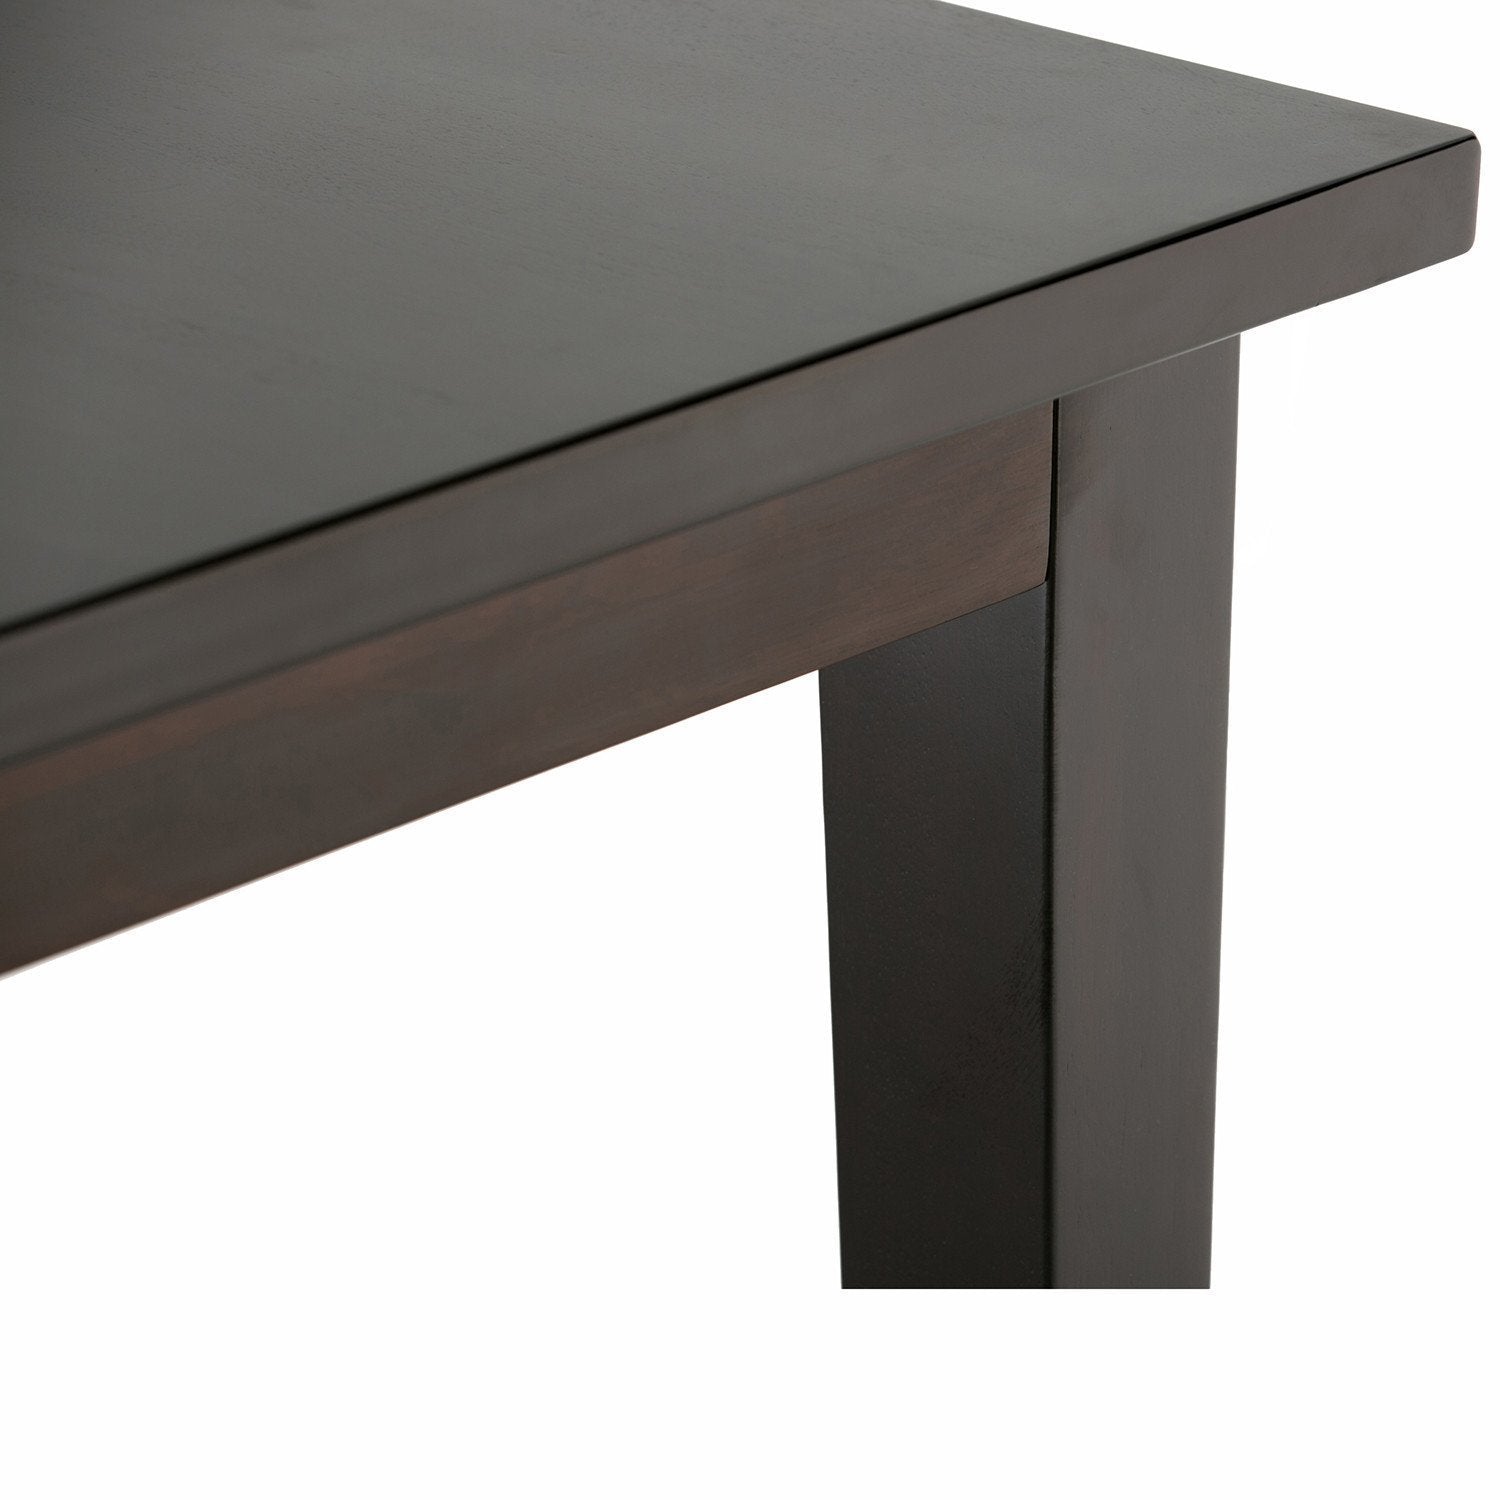 Java Brown Rubberwood | Eastwood 66 x 40 inch Rectangle Dining Table